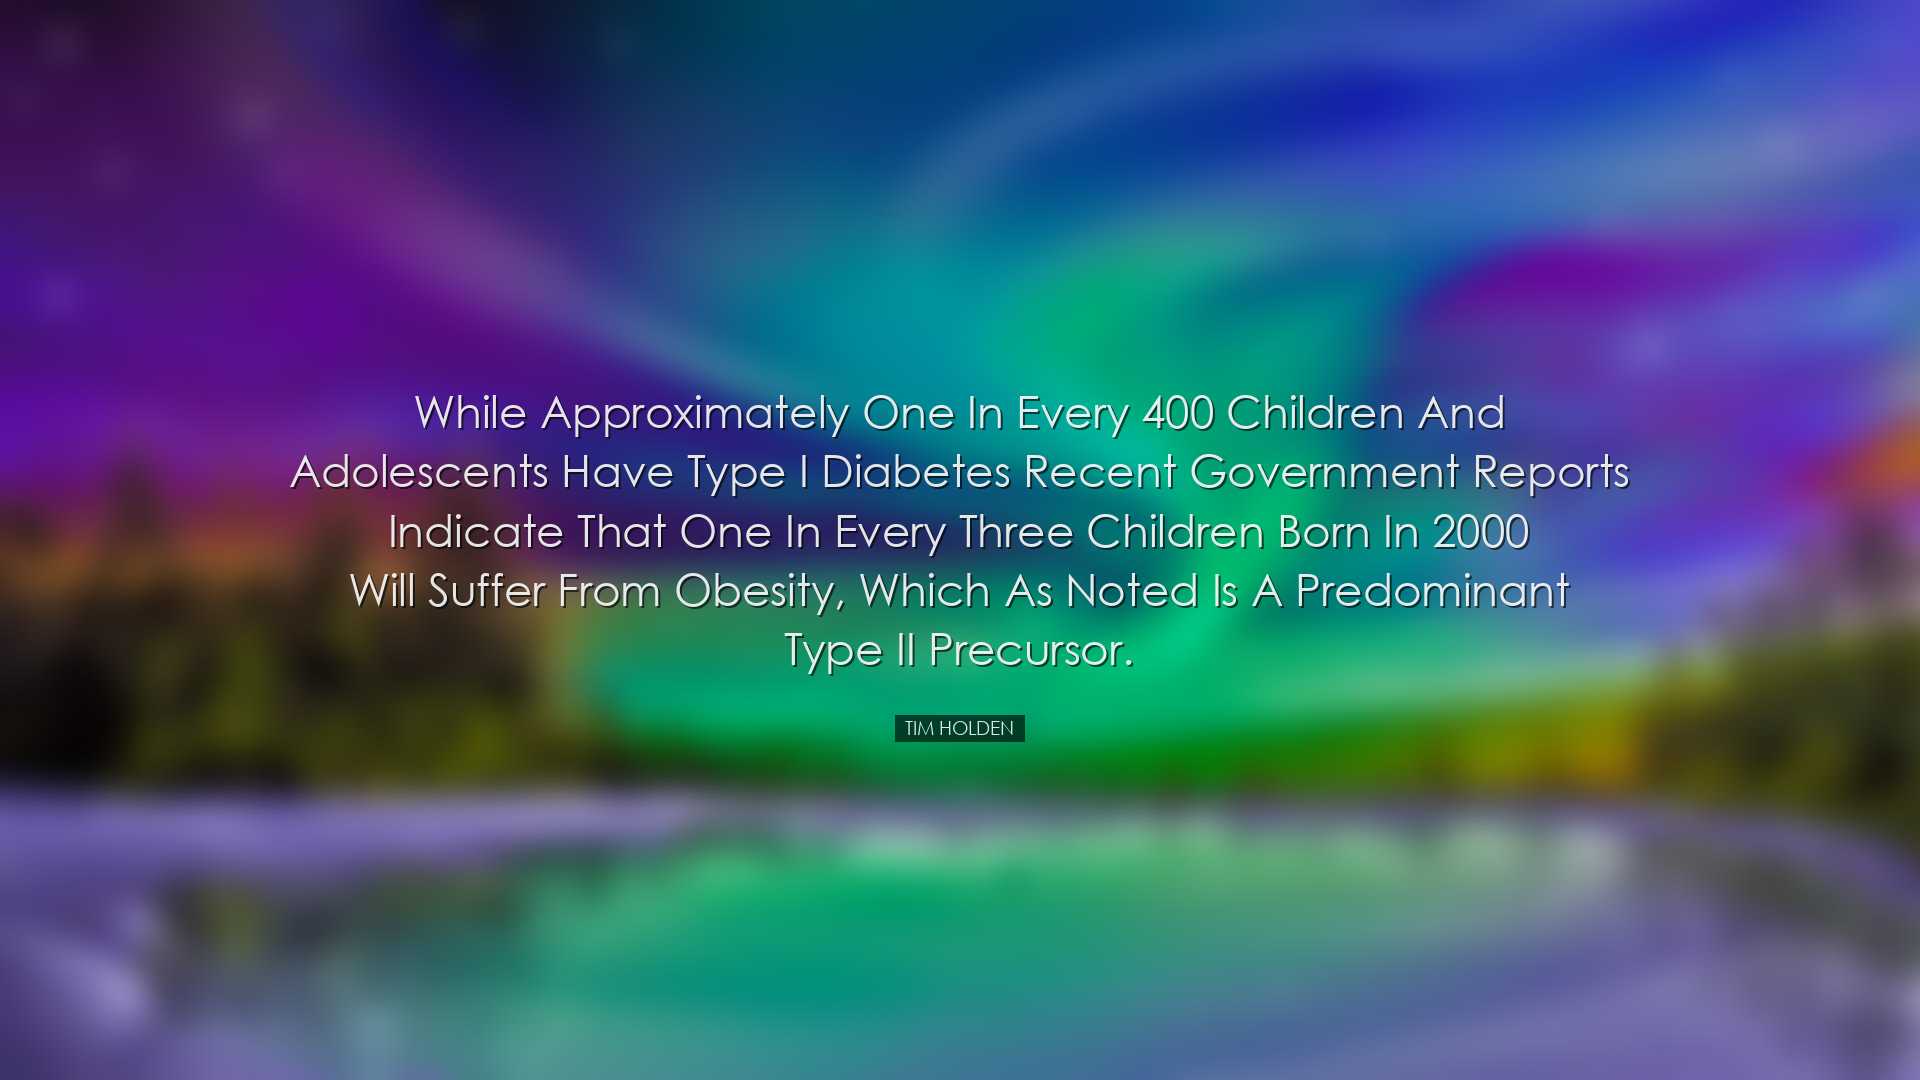 While approximately one in every 400 children and adolescents have